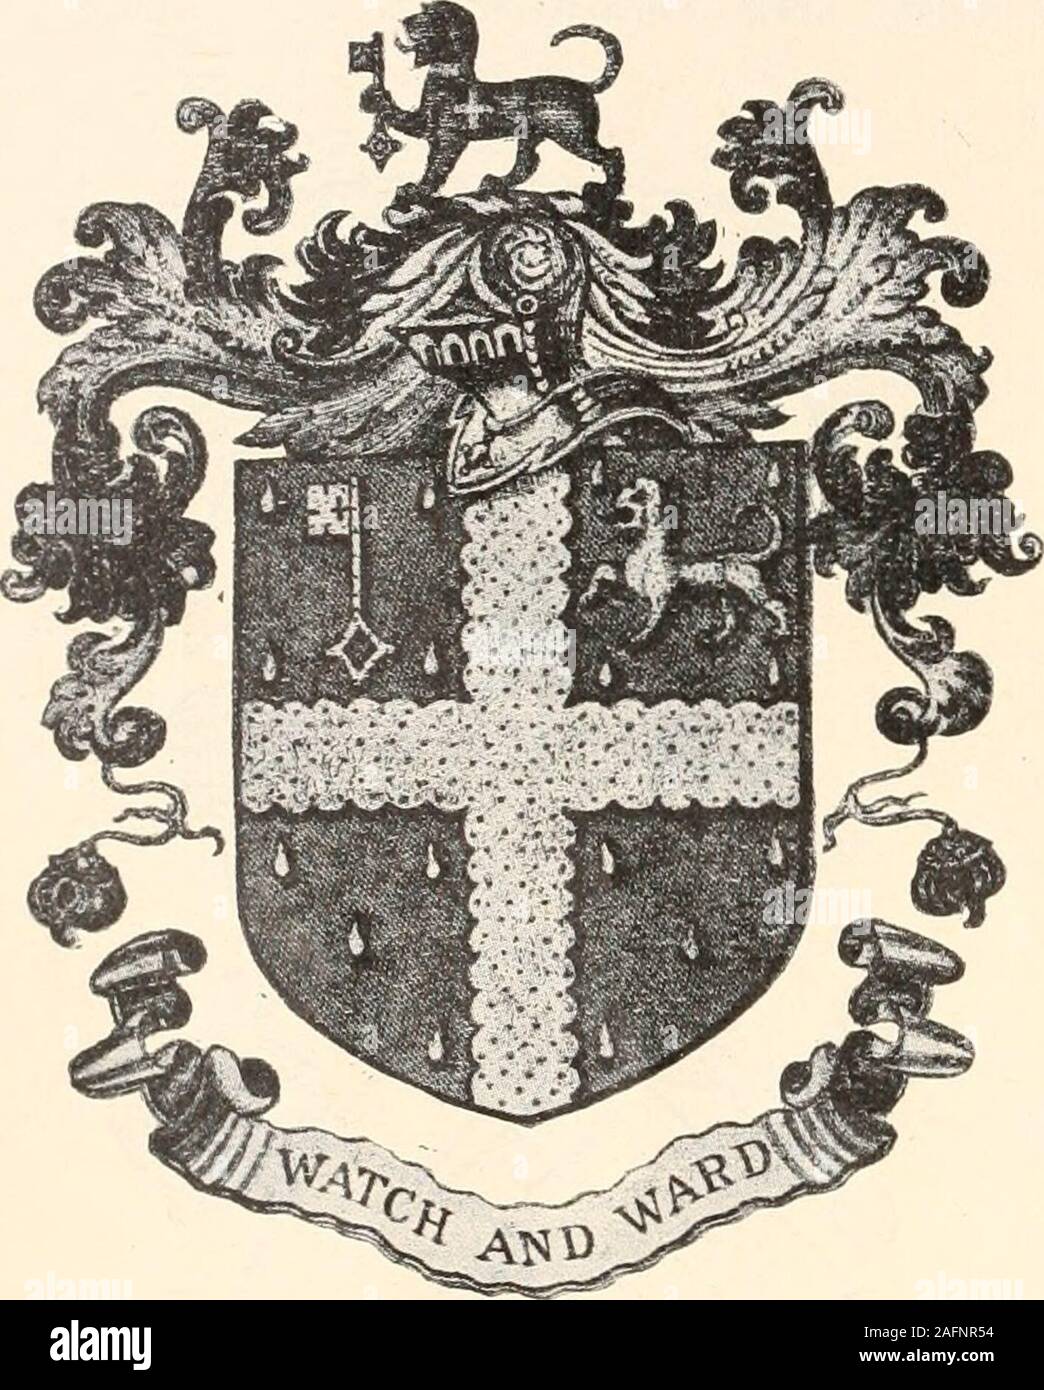 . Armorial families : a directory of gentlemen of coat-armour. to—Watch and ward. Livery — Plain dark green.Sons of Lawrence William Adamson, Esq., LL.D., 12 aDa aDd I.p. COS. Northumberland and Durham, D.L. for former co. (High Sheriff 1900-1901), a Member of the Manx Bar, l&gt;. 1829; d. 1911; »t. firstly, 1853, Anne Jane (who died), third d. of John T. E. Flint, of Filleigh, Devonshire; and secondly, 1889, Sarah Frances, youngest d. of the late William Swan, of Walker, Newcastle-on-Tyne:— Jolin George Adamson, Esq., C.M.G. (1918), Col., late Major, Kings Own Yorkshire Light Infantry (ret.), Stock Photo